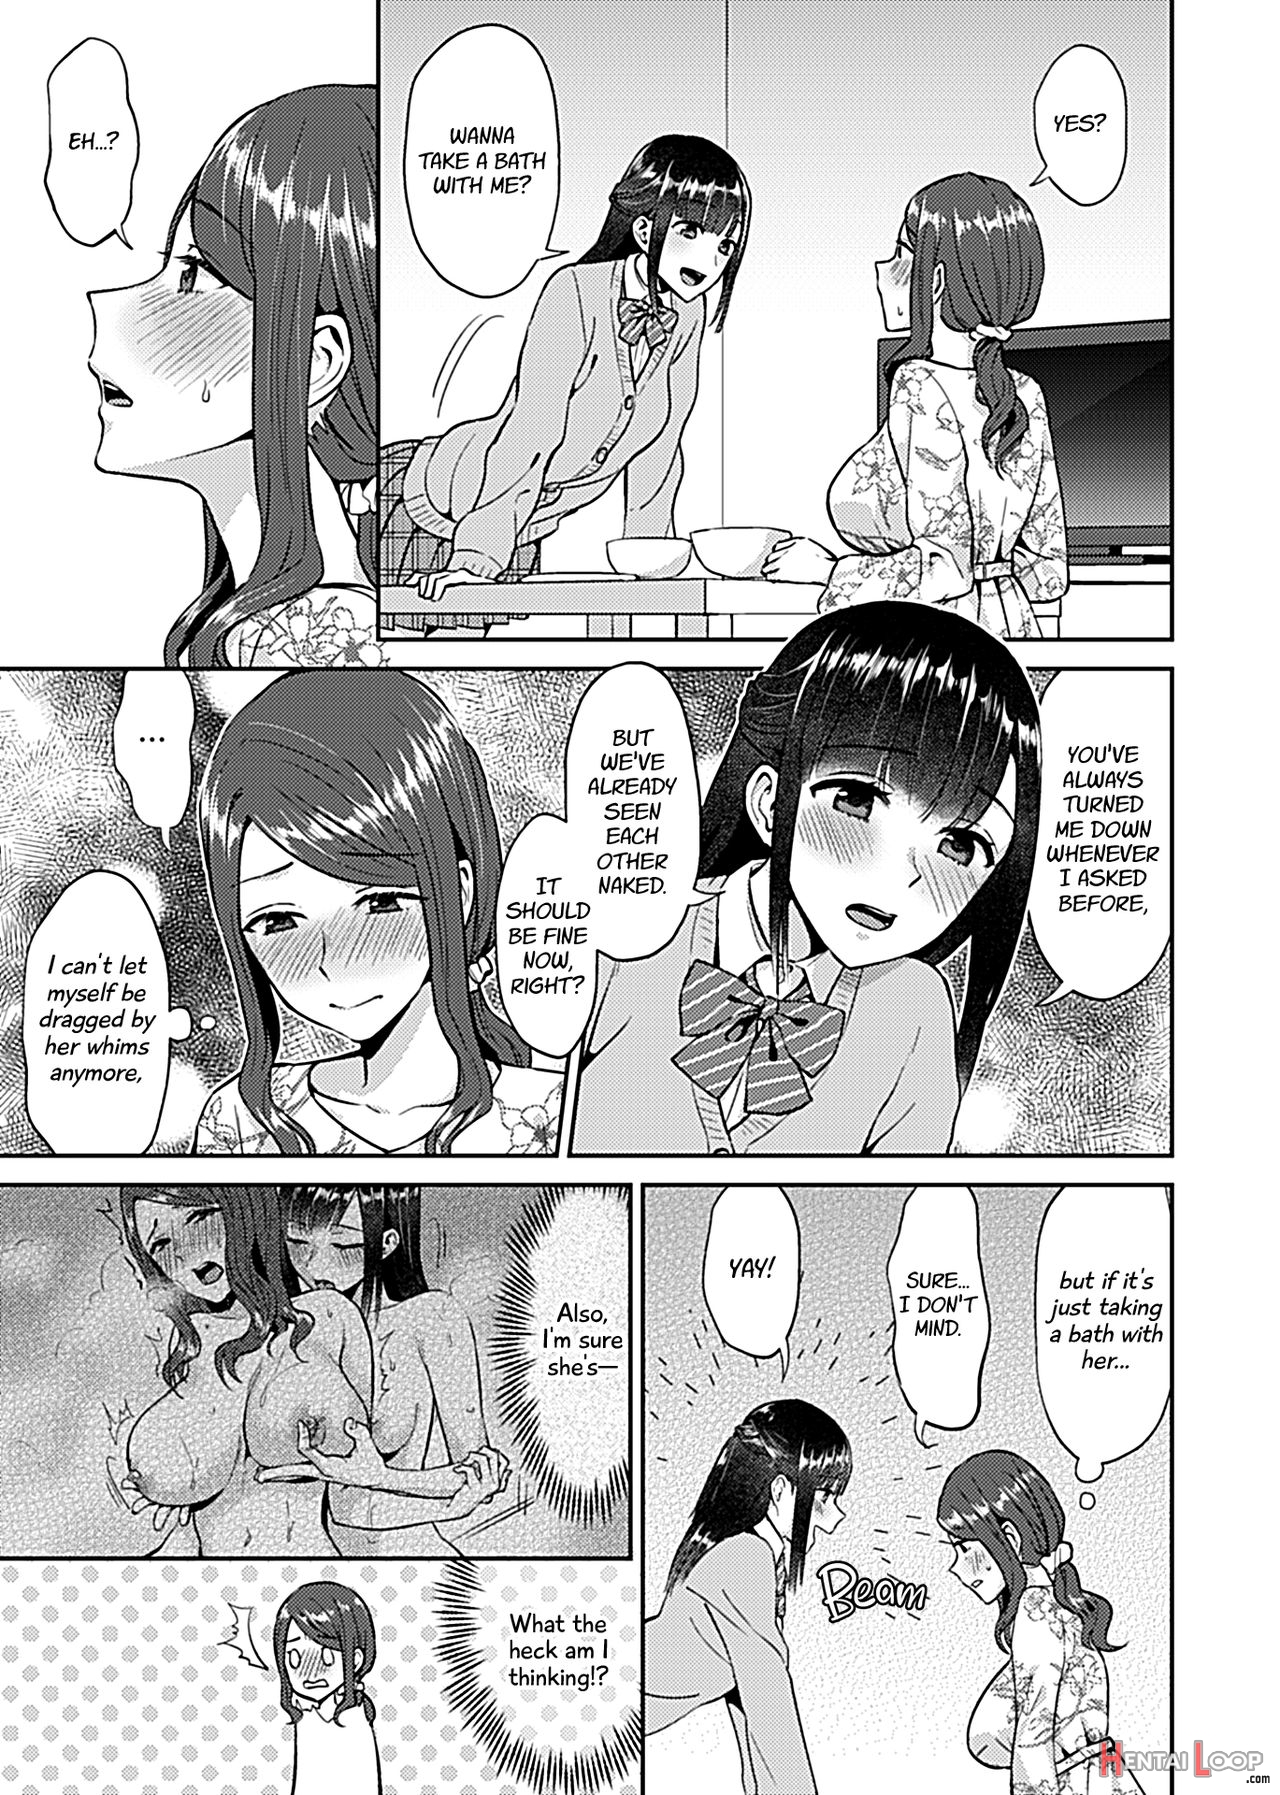 Lilies Are In Full Bloom - Volume 1 page 25